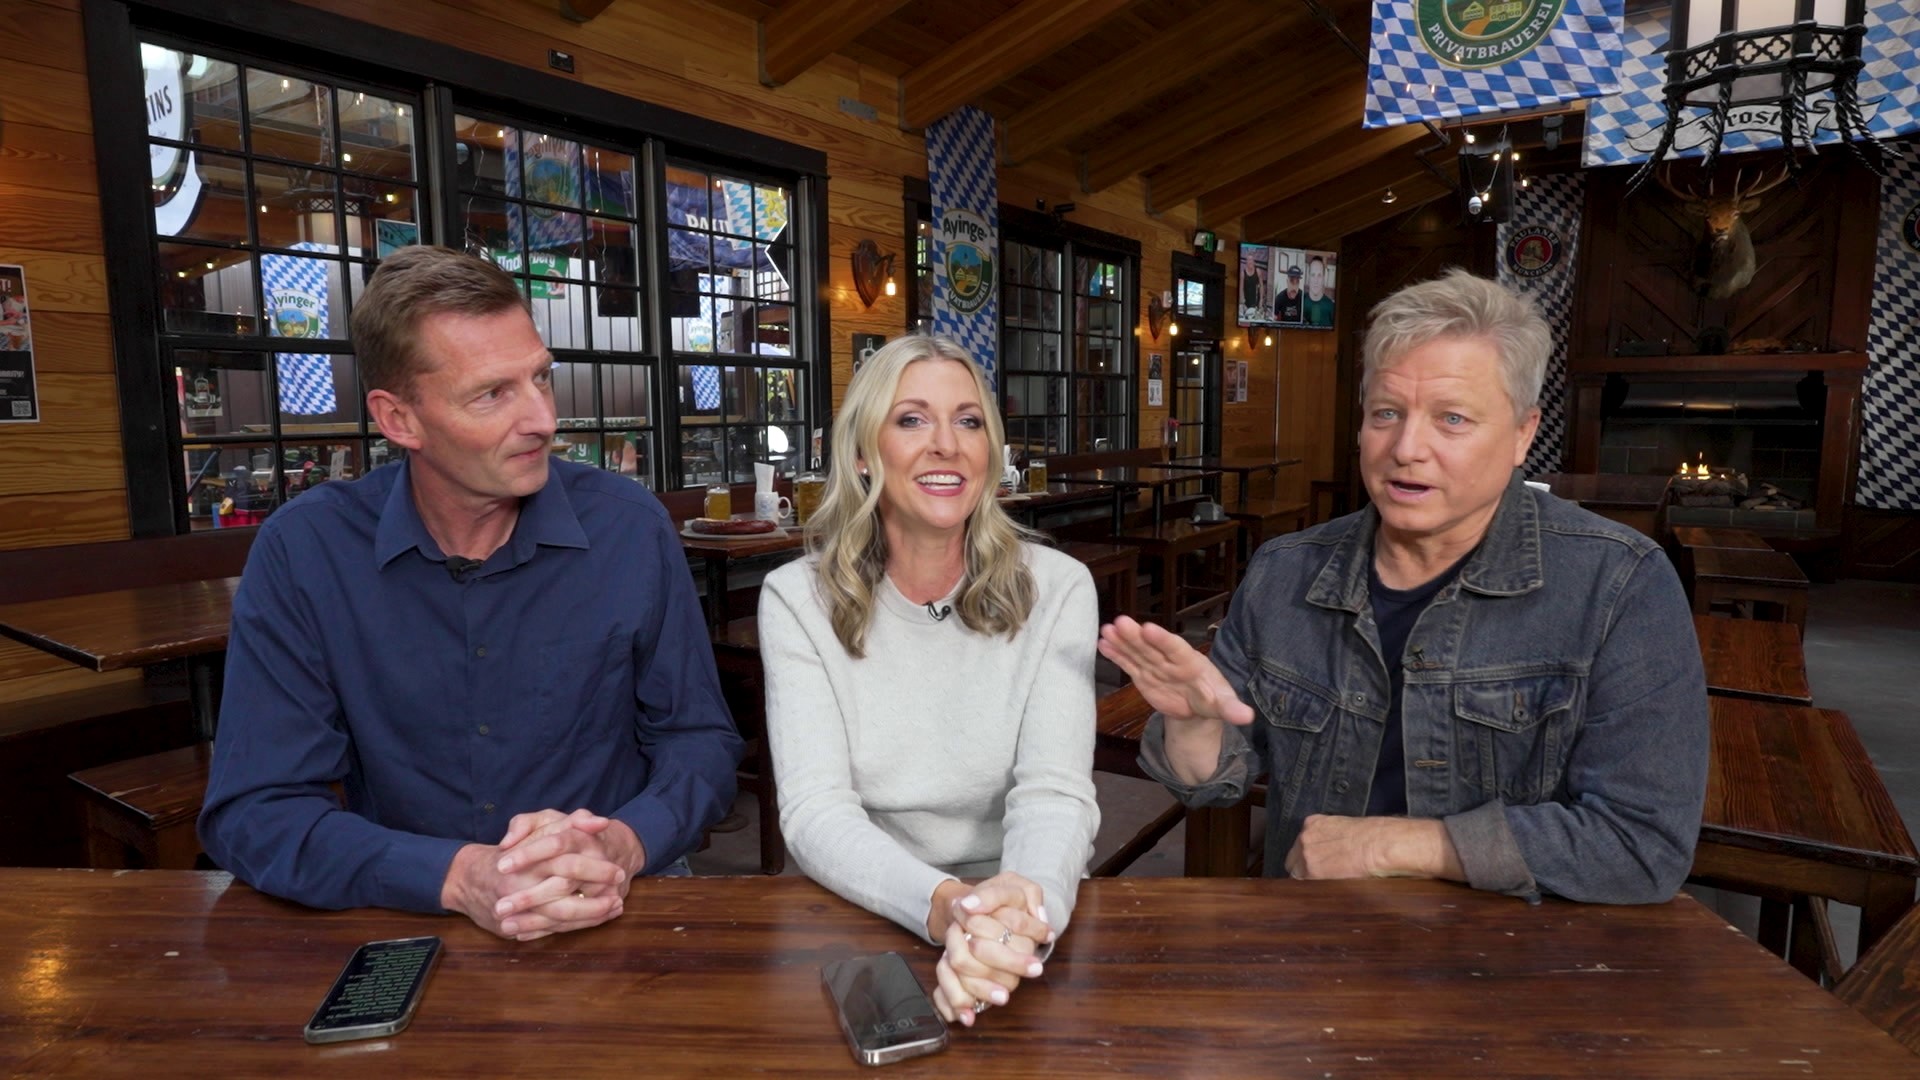 Evening hosts share what they are currently obsessed with from TV shows to food to movies. #k5evening